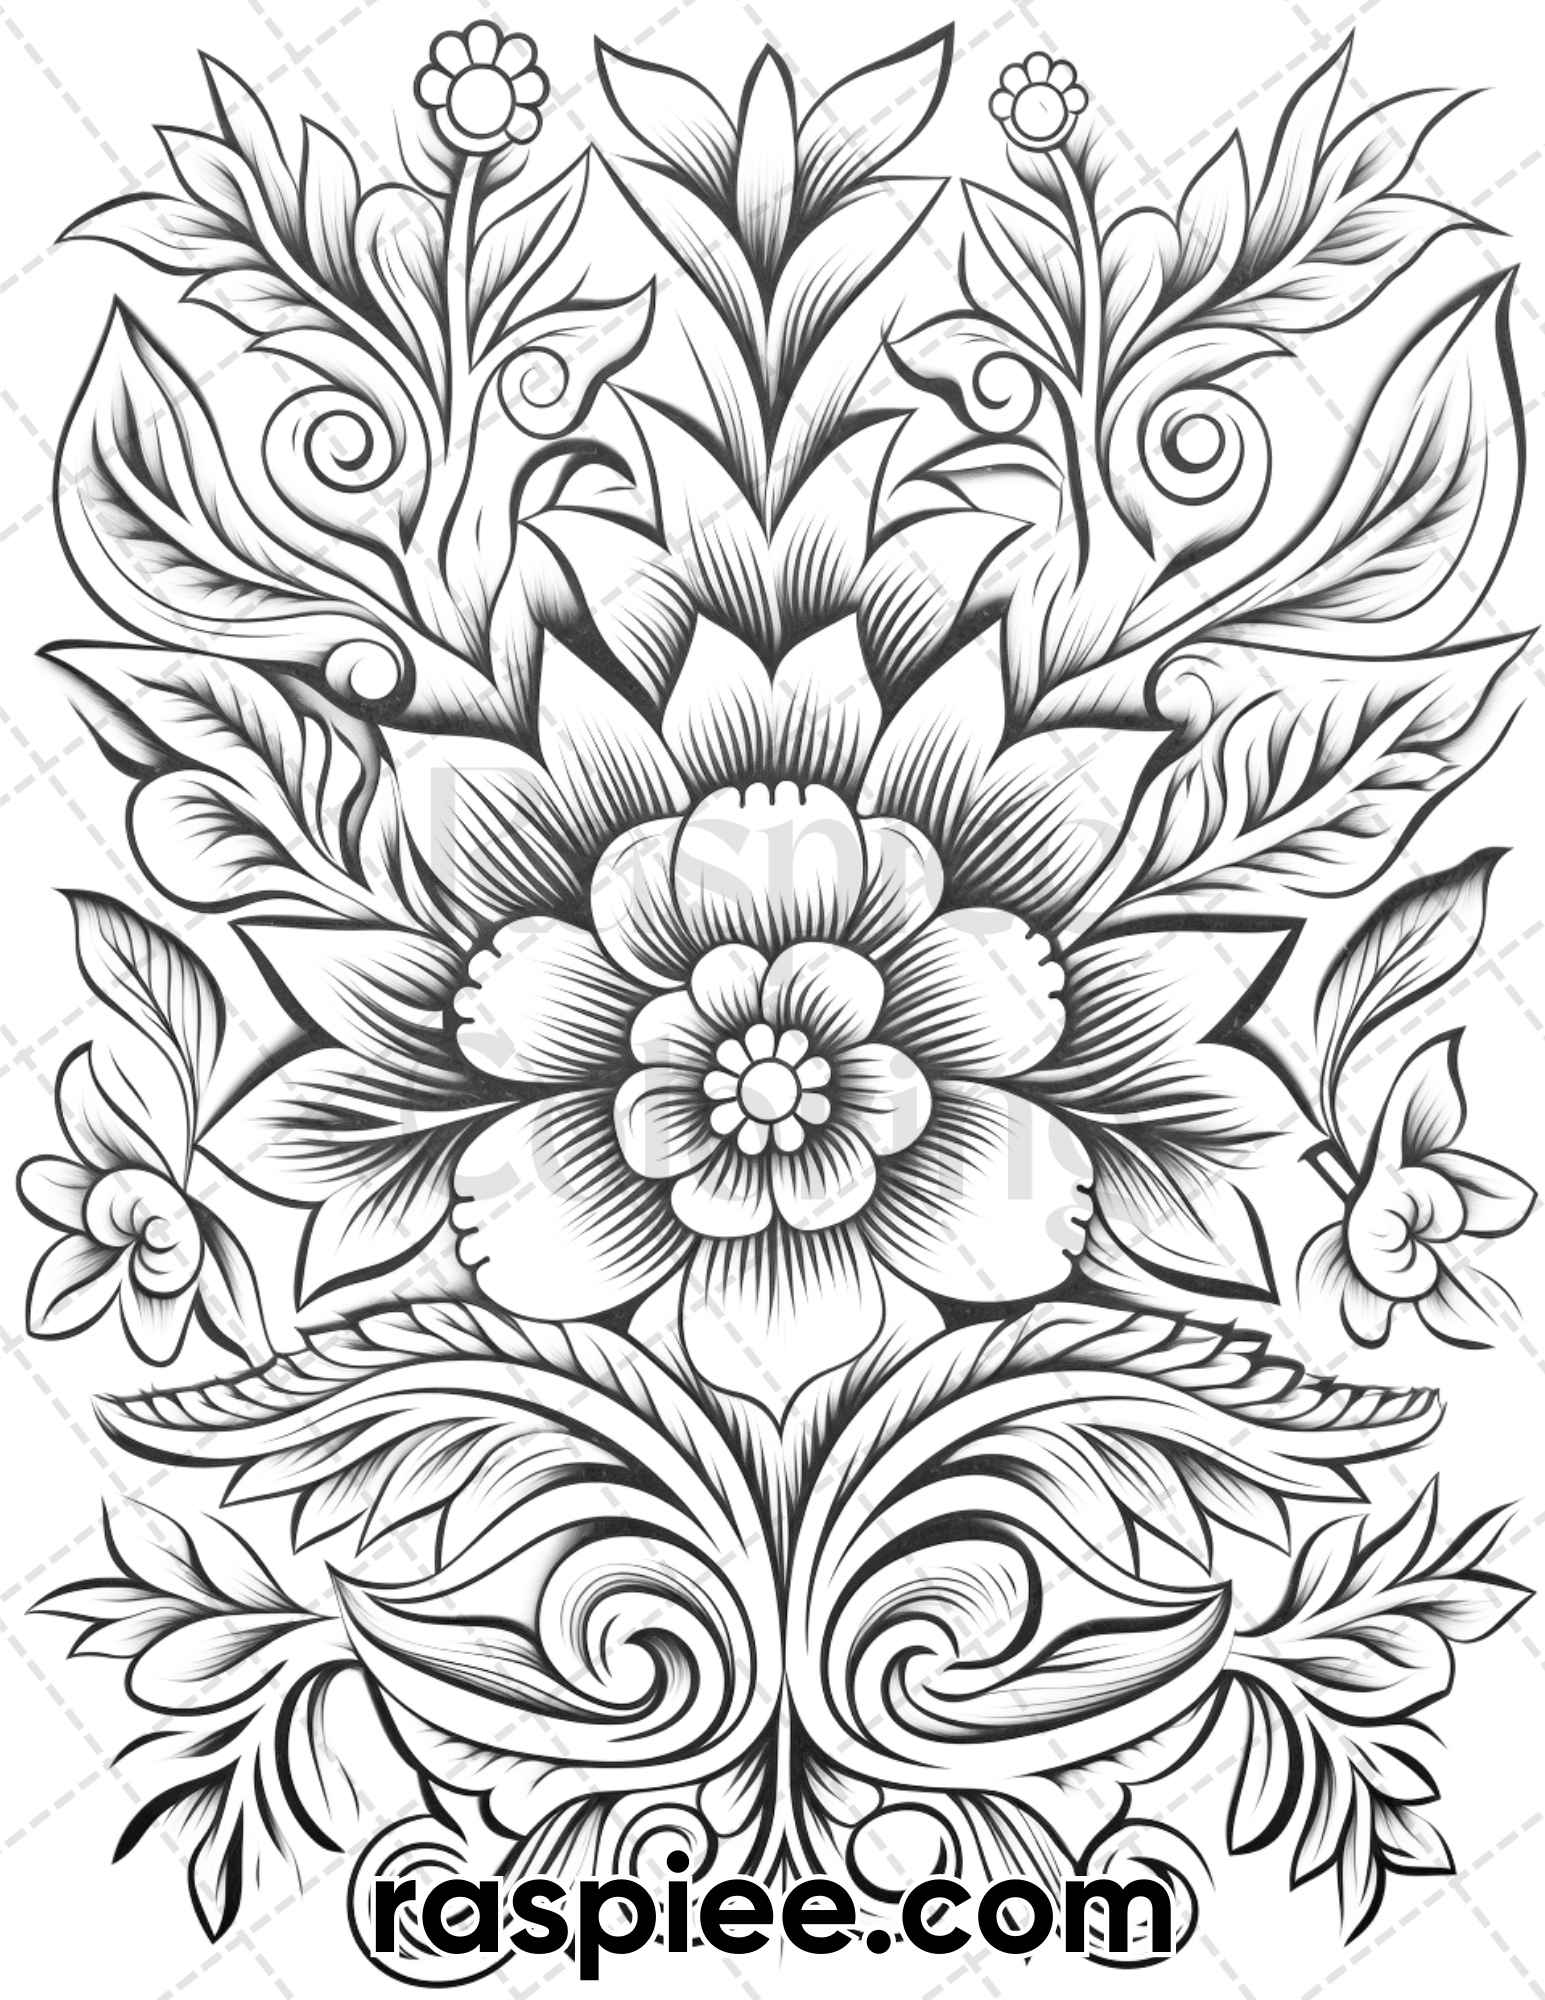 Folk art florals grayscale adult coloring pages printable pdf inst â coloring